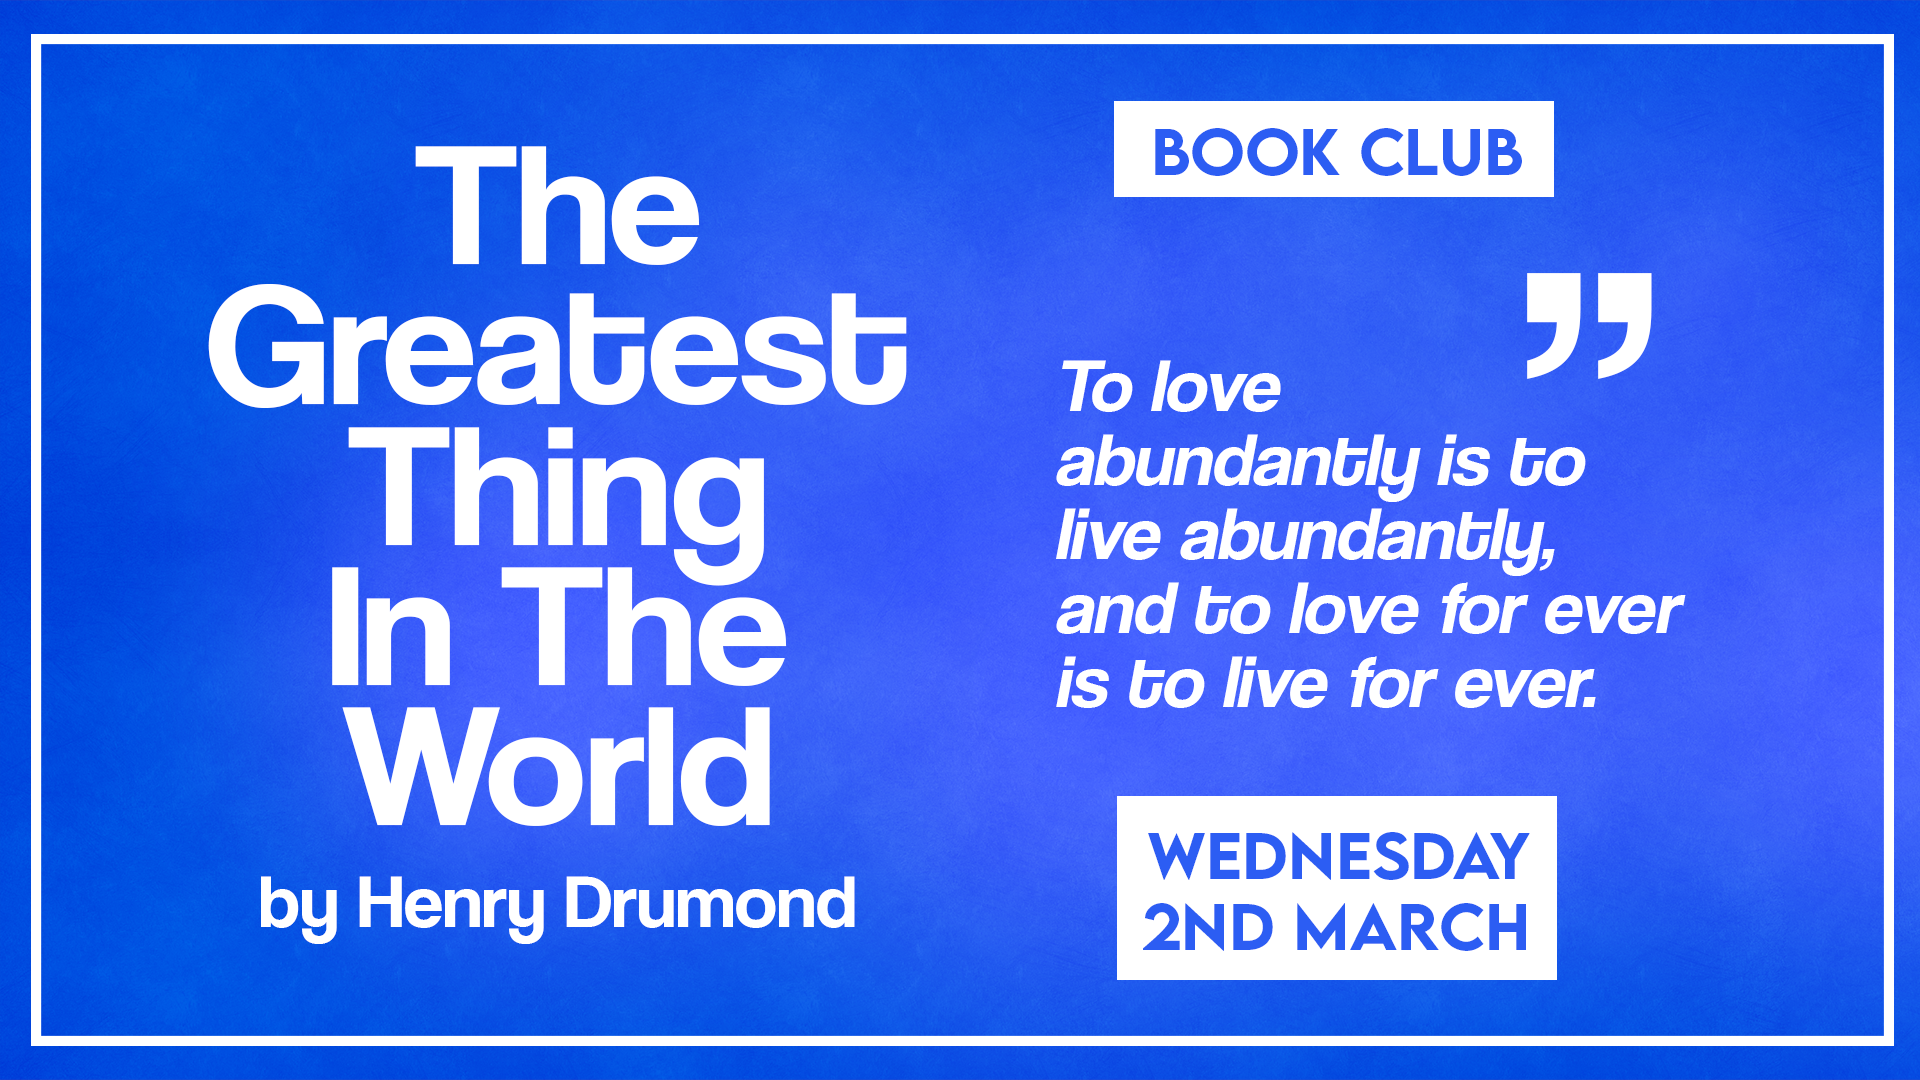 The Greatest Thing - Book Club